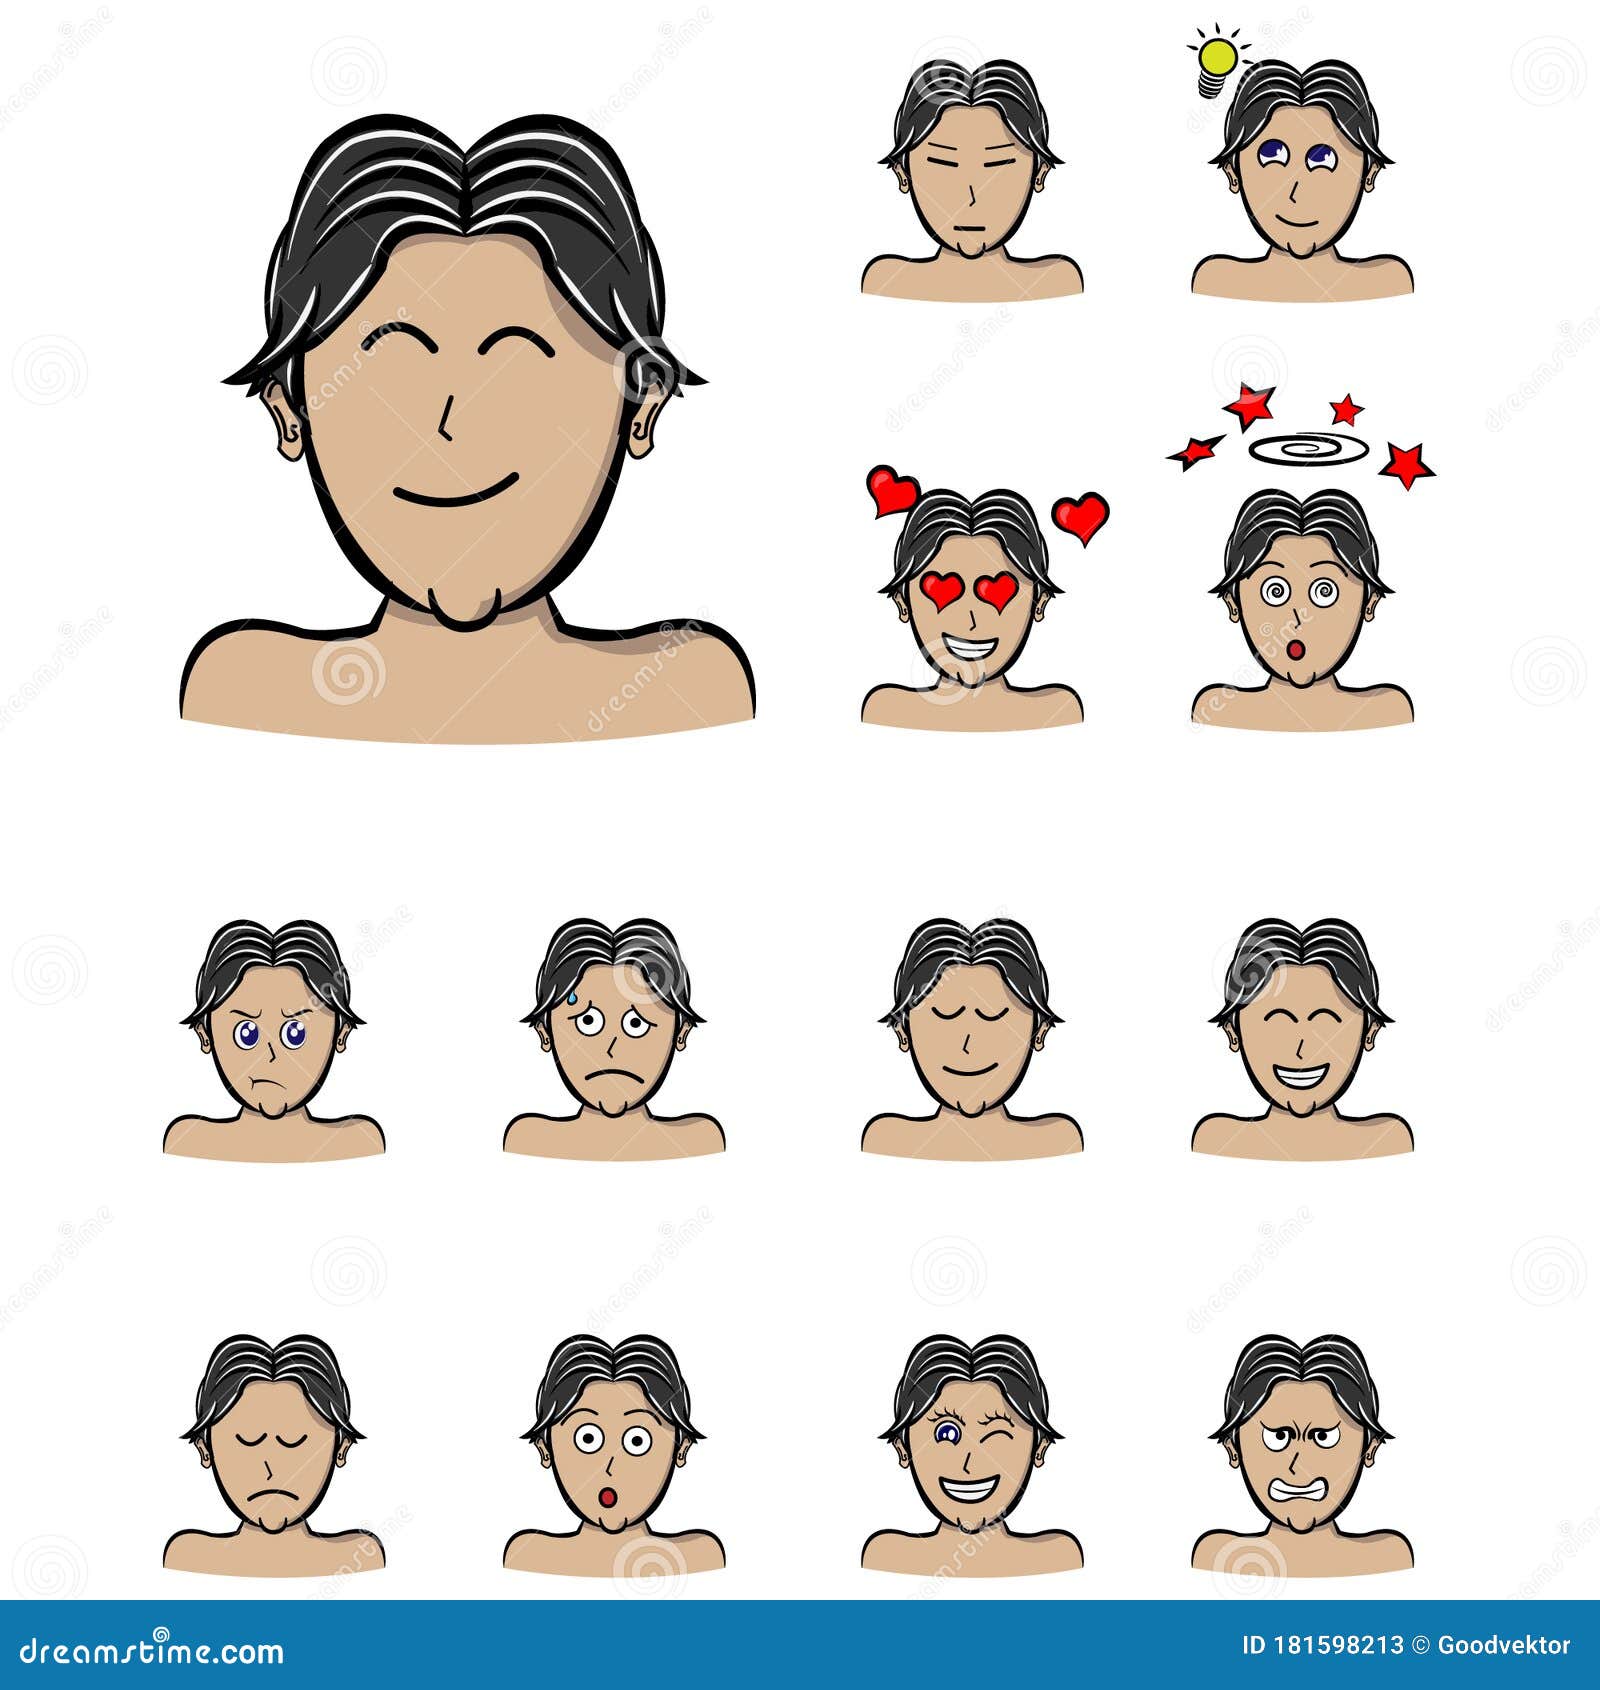 Emotions Man Middle Parting Hair Male Character. Handsome Man Emoji with  Various Facial Expressions. Illustration in Stock Vector - Illustration of  cute, fretful: 181598213